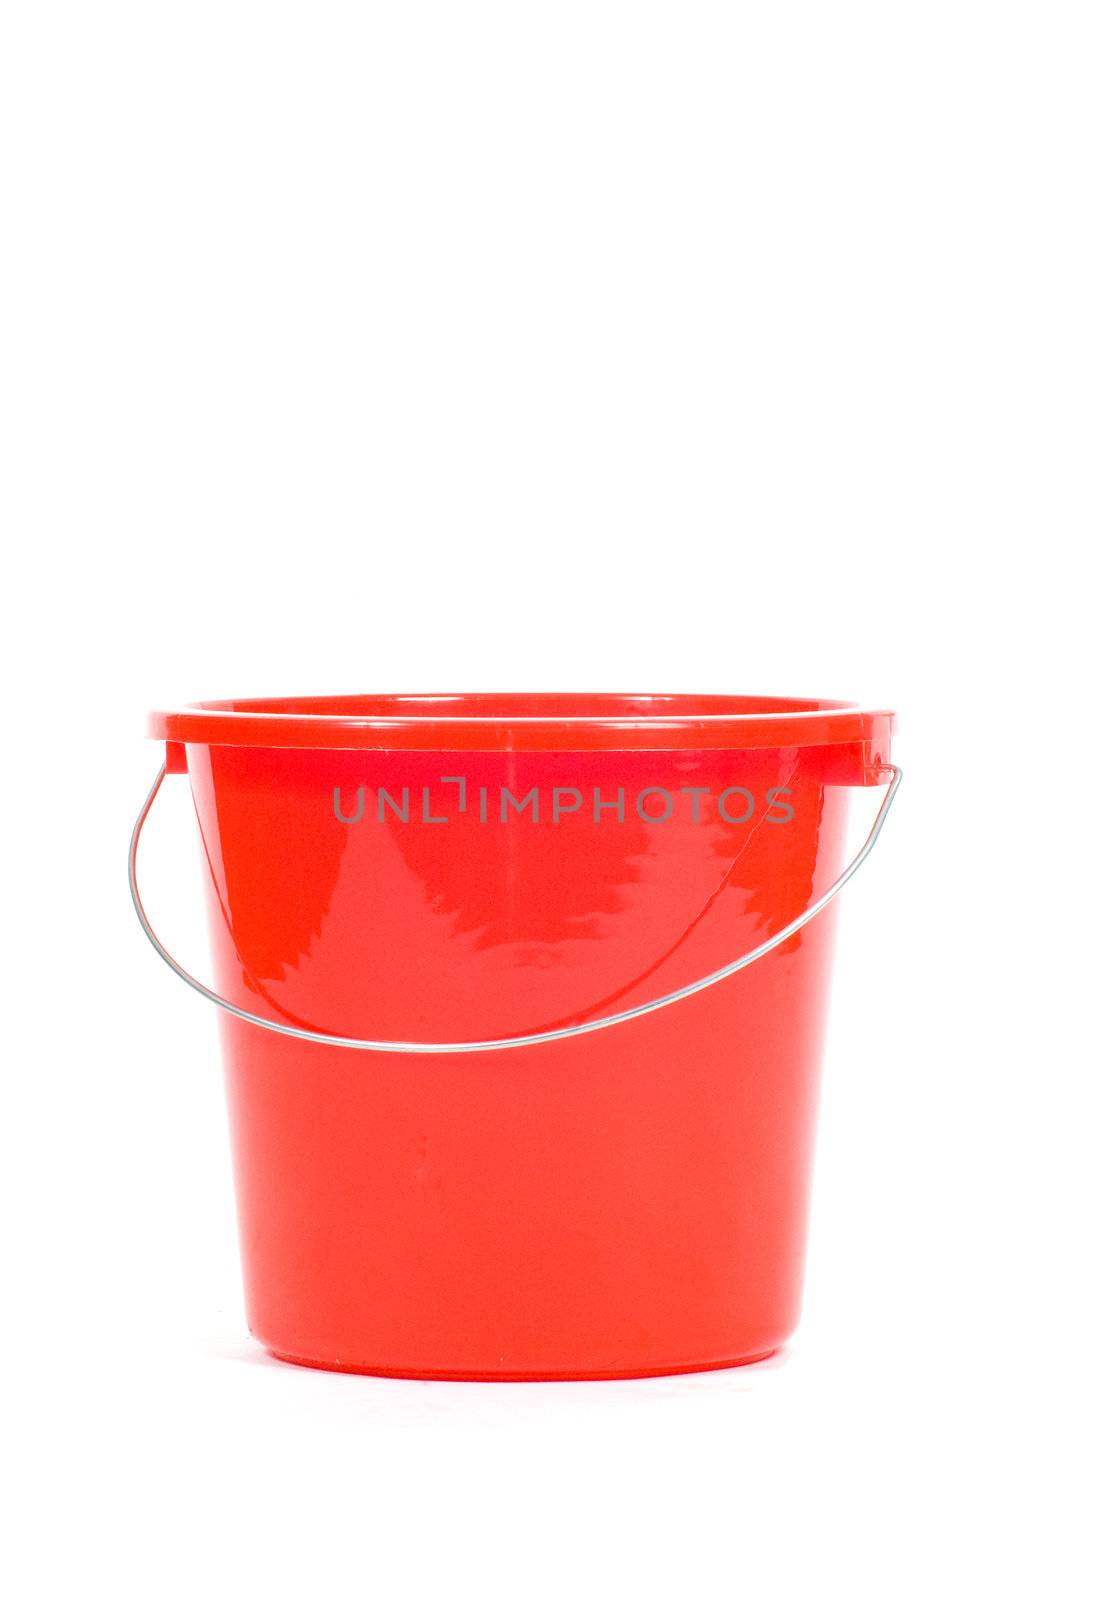 red bucket by ladyminnie